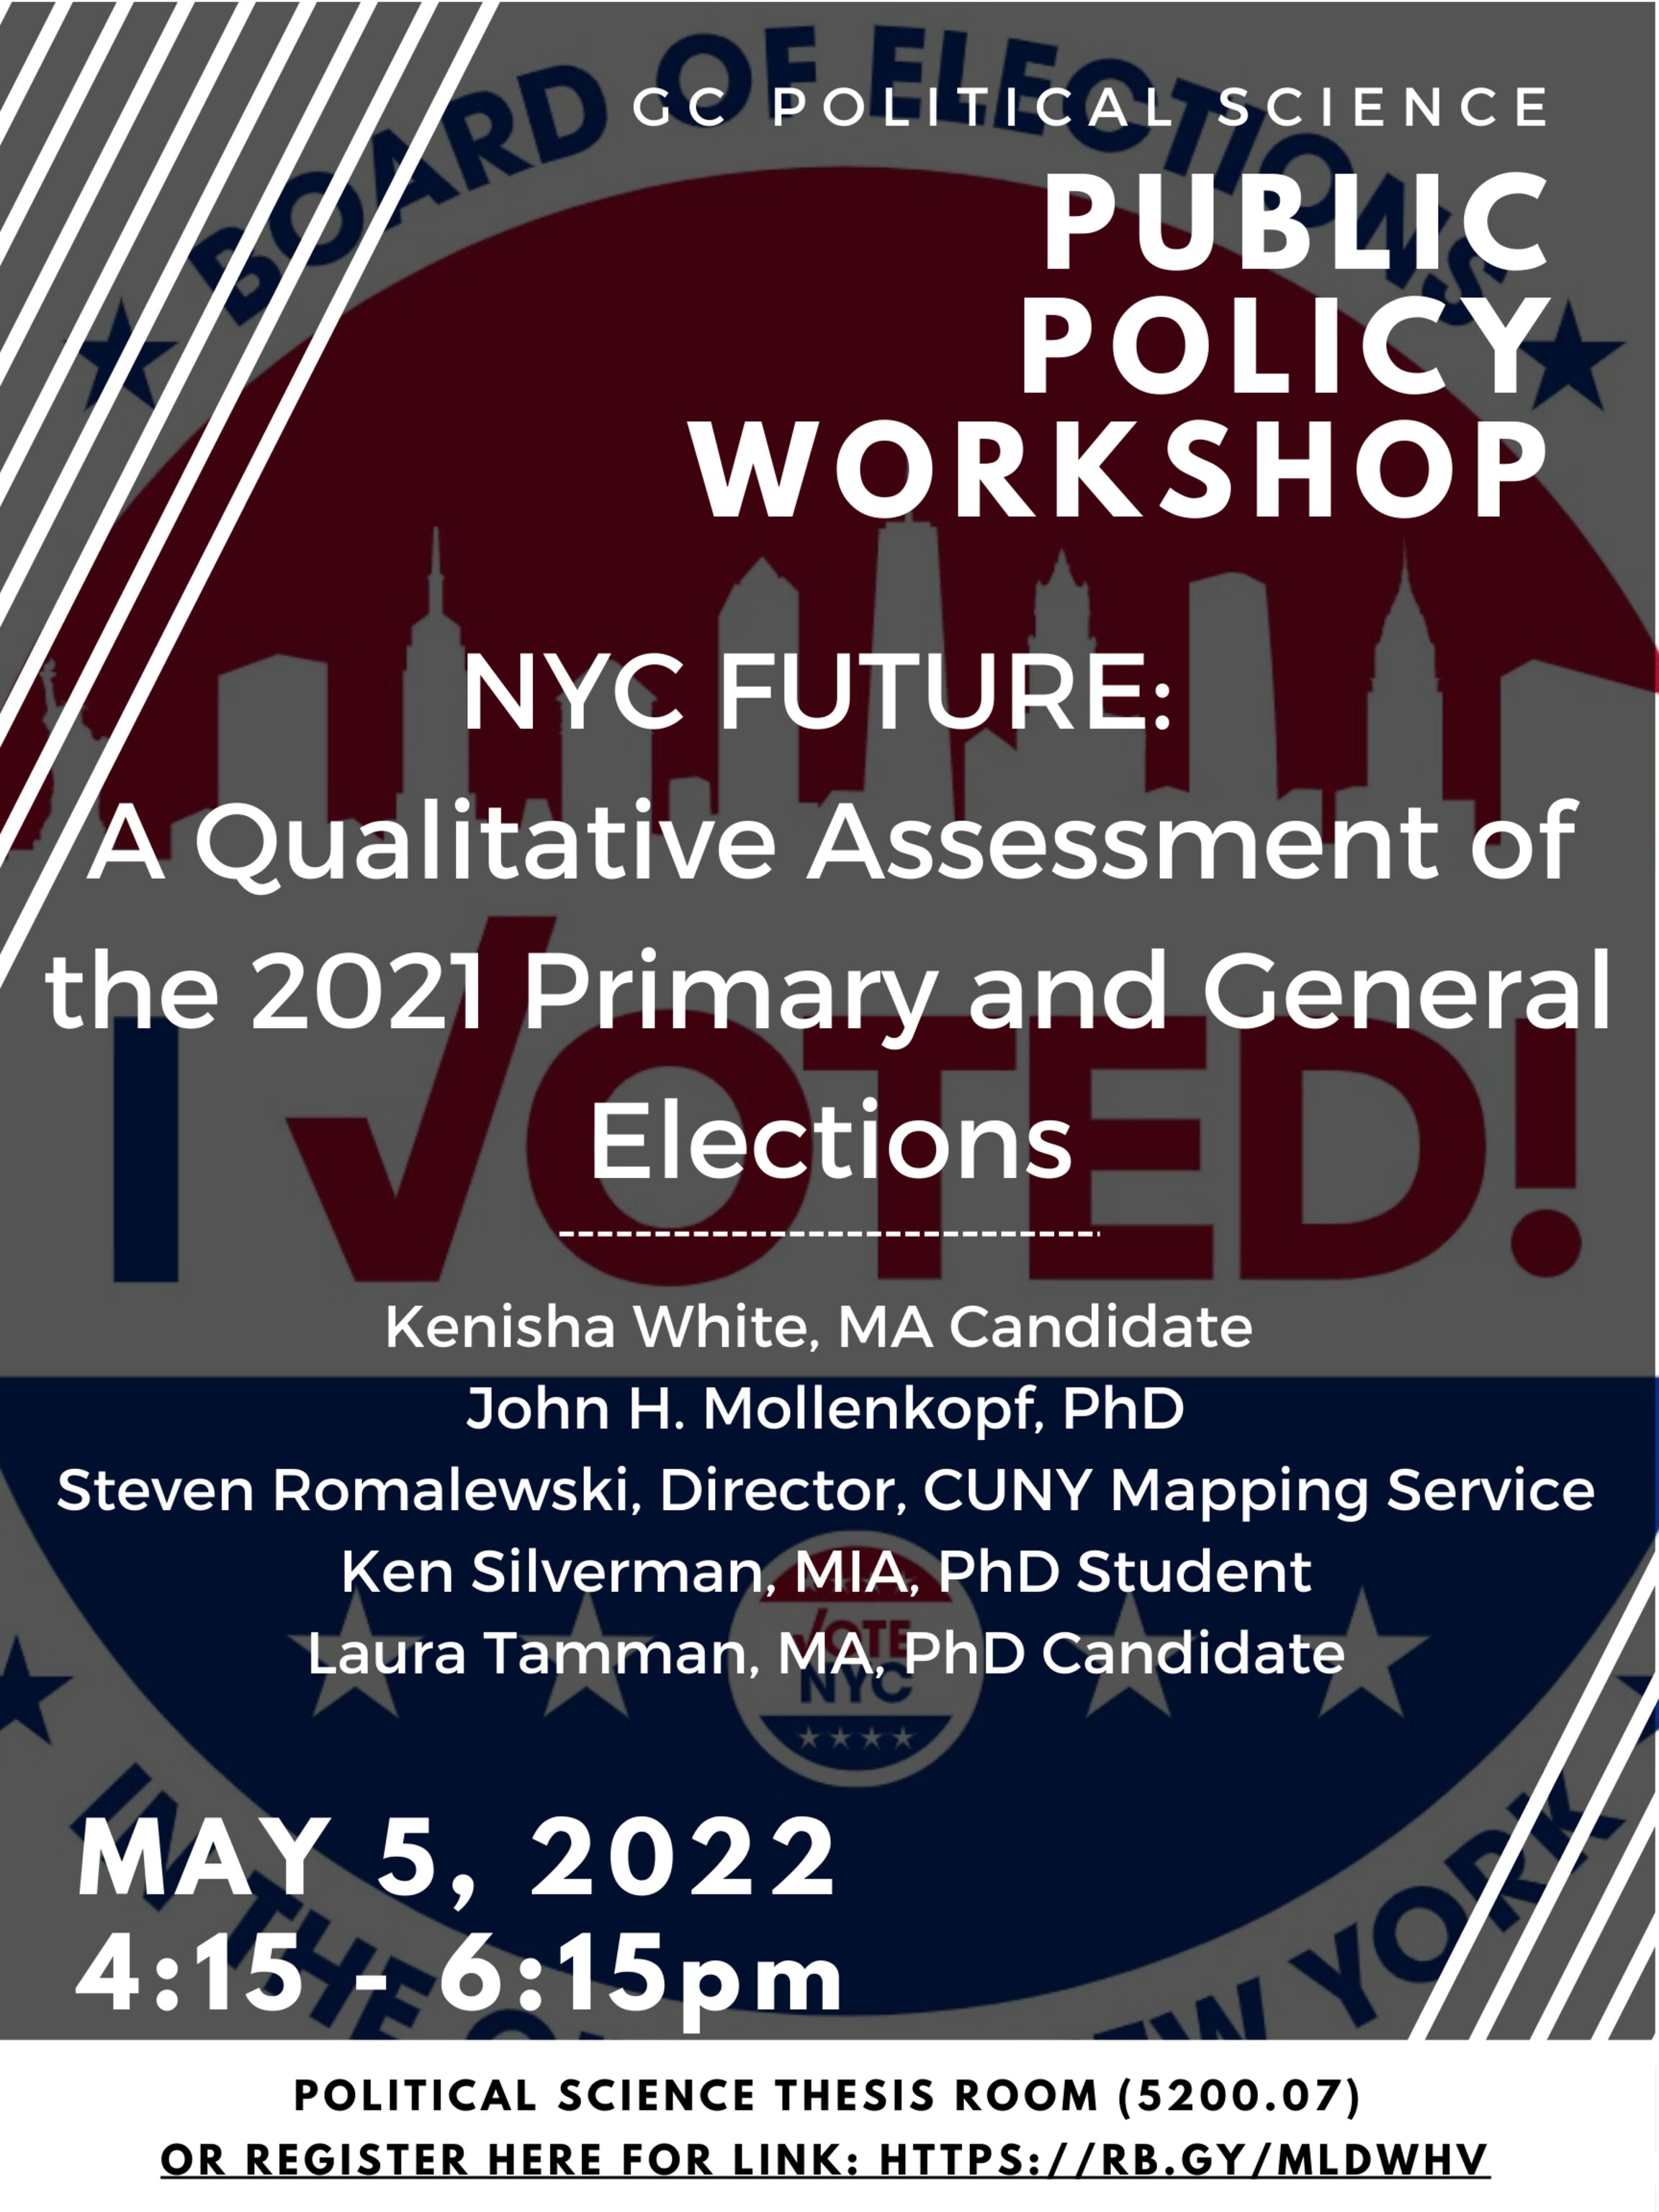 Public Policy Workshop: "NYC Future: A Qualitative Assessment of the 2021 Primary and General Elections," Thursday, May 5, 4:15-6:15PM EST